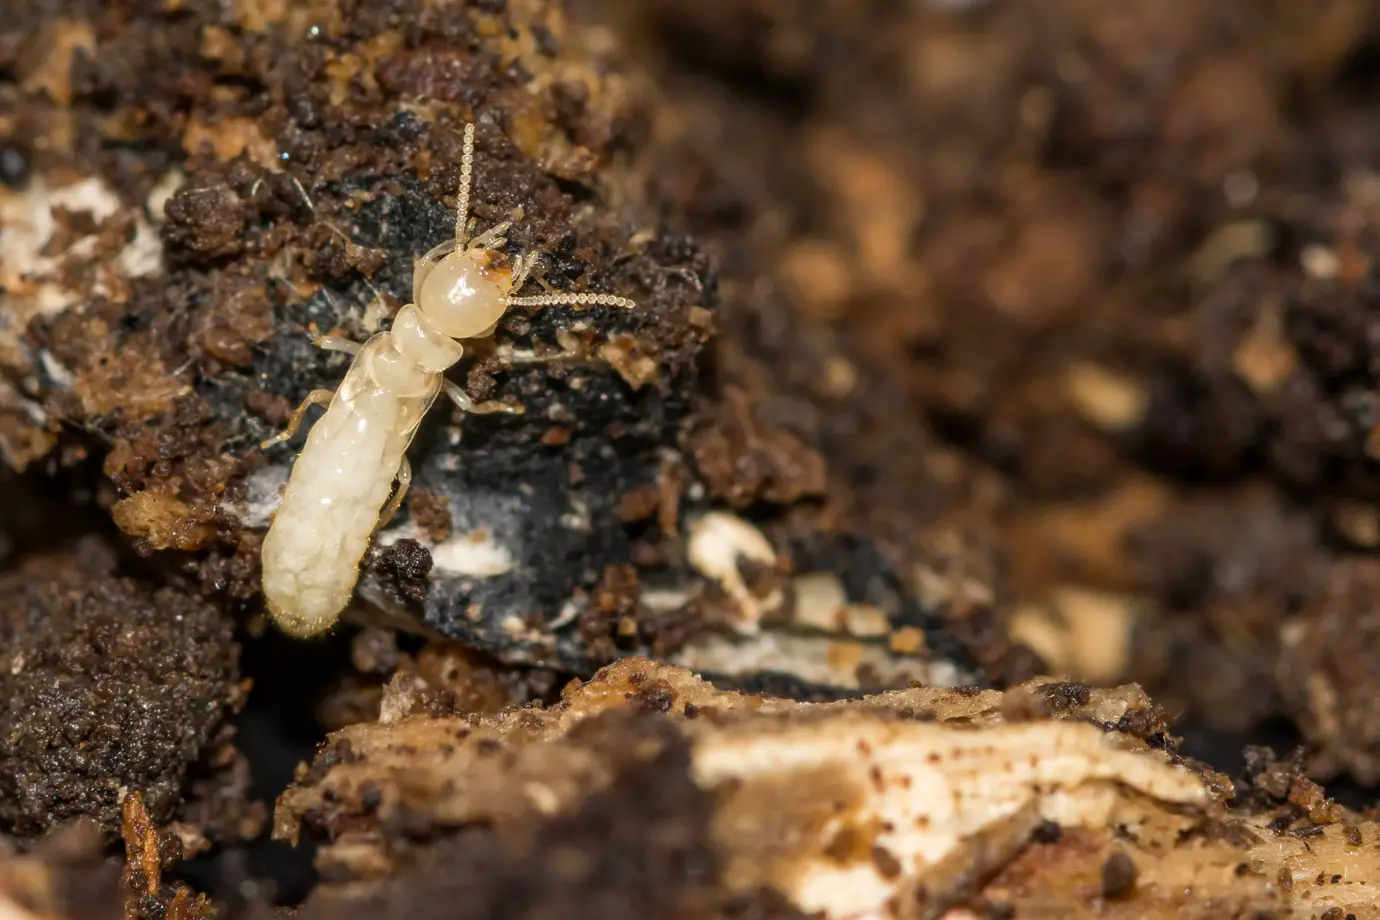 Subterranean termites are a type of termite you can get in your home.